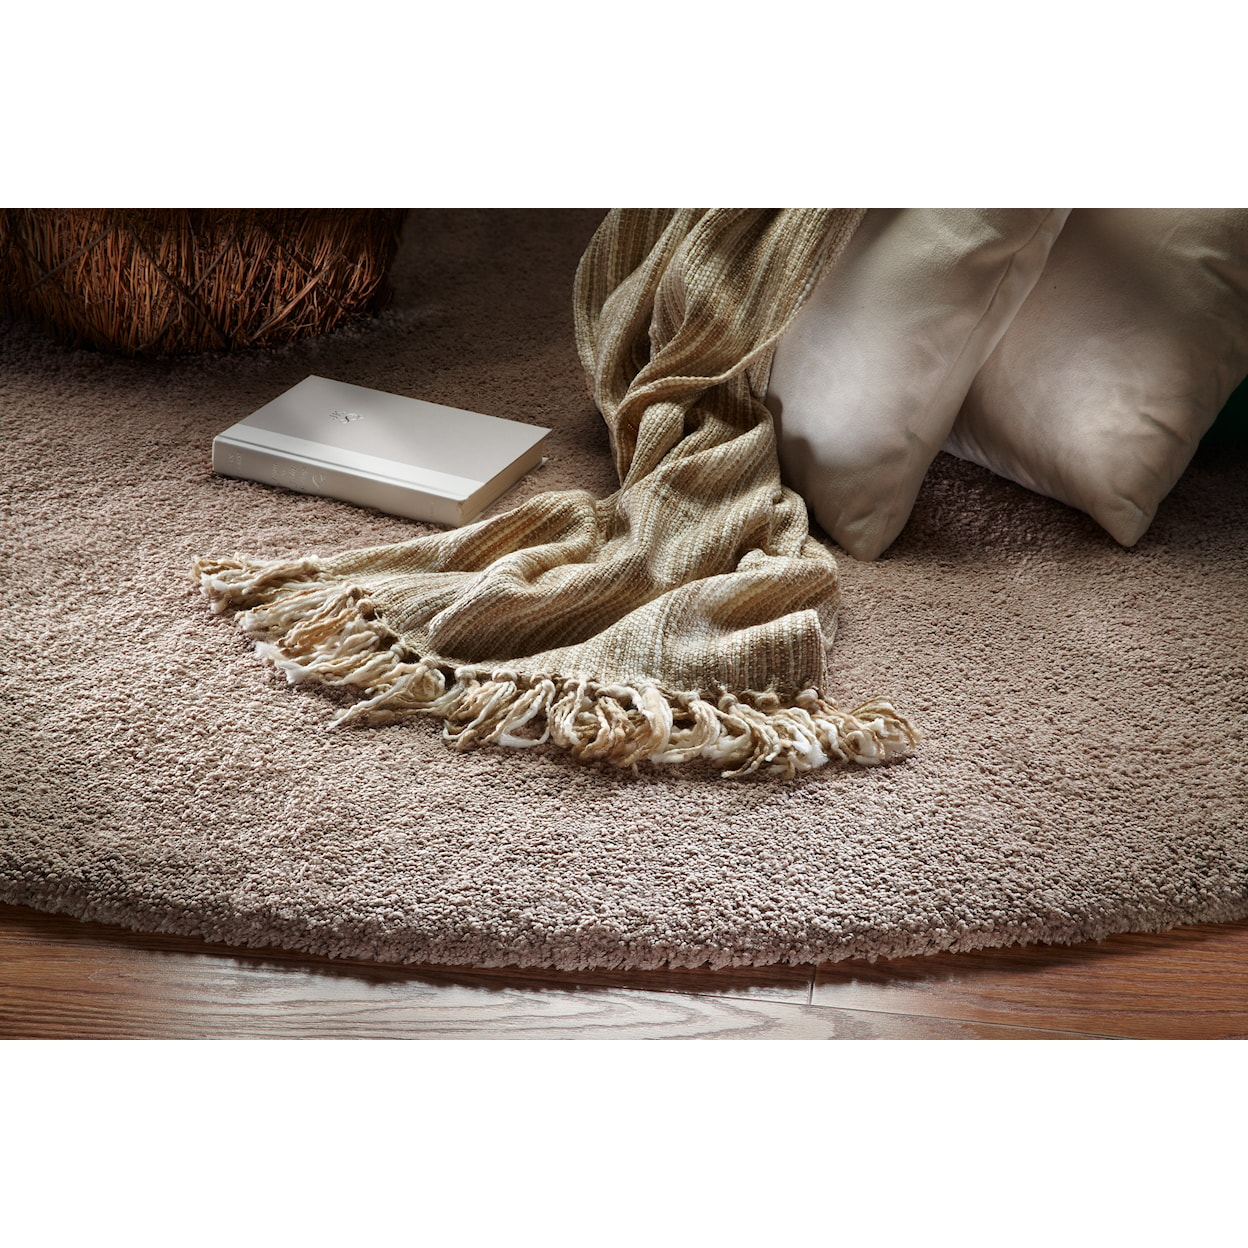 Kas Bliss 6' Round Rug